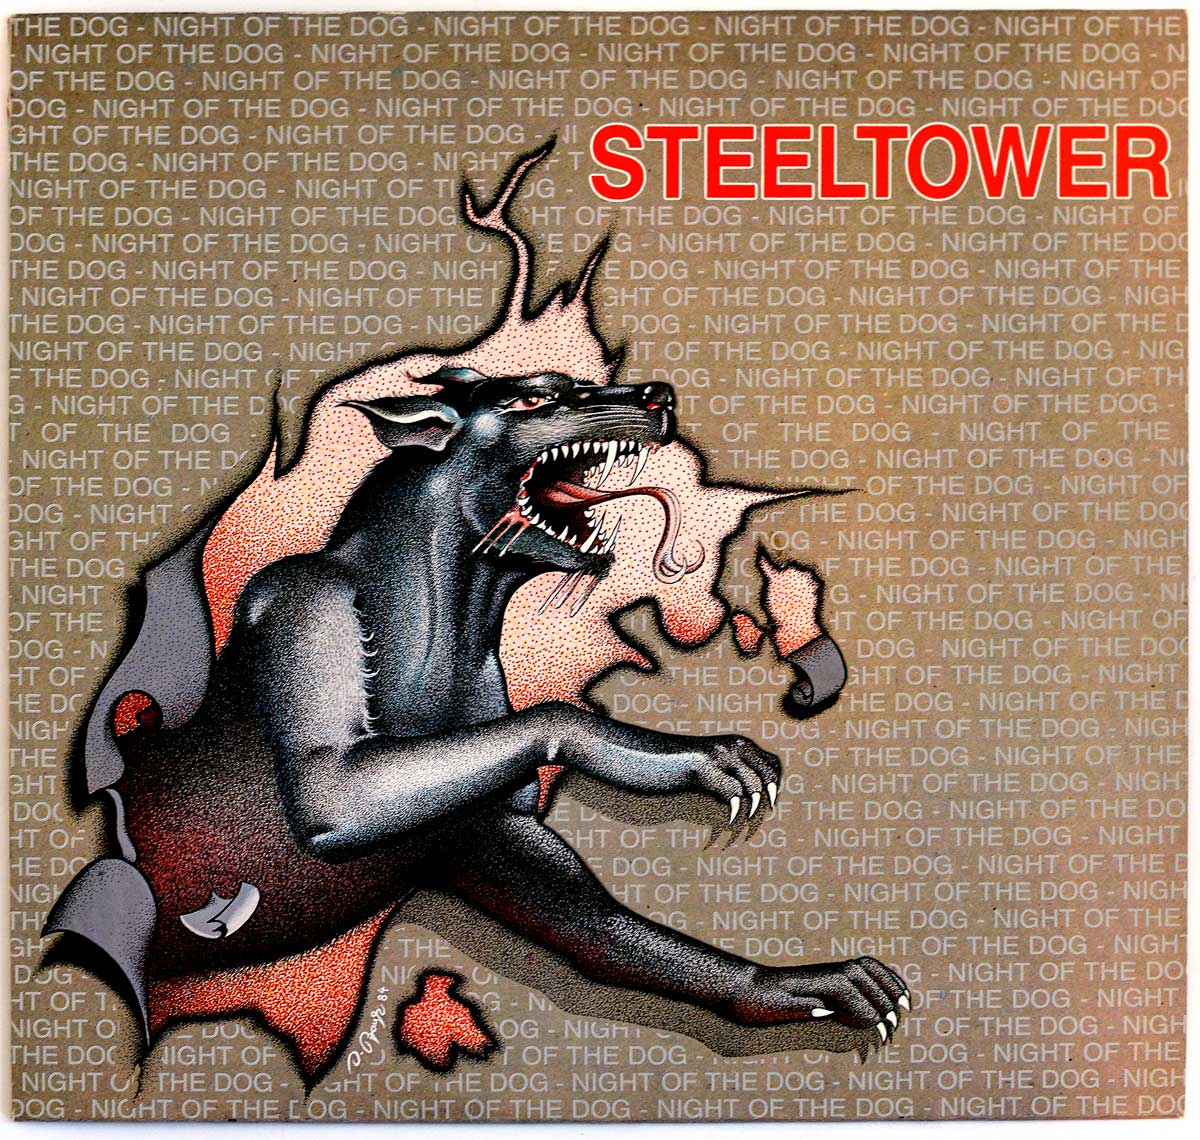 large album front cover photo of: STEELTOWER Night of the Dog